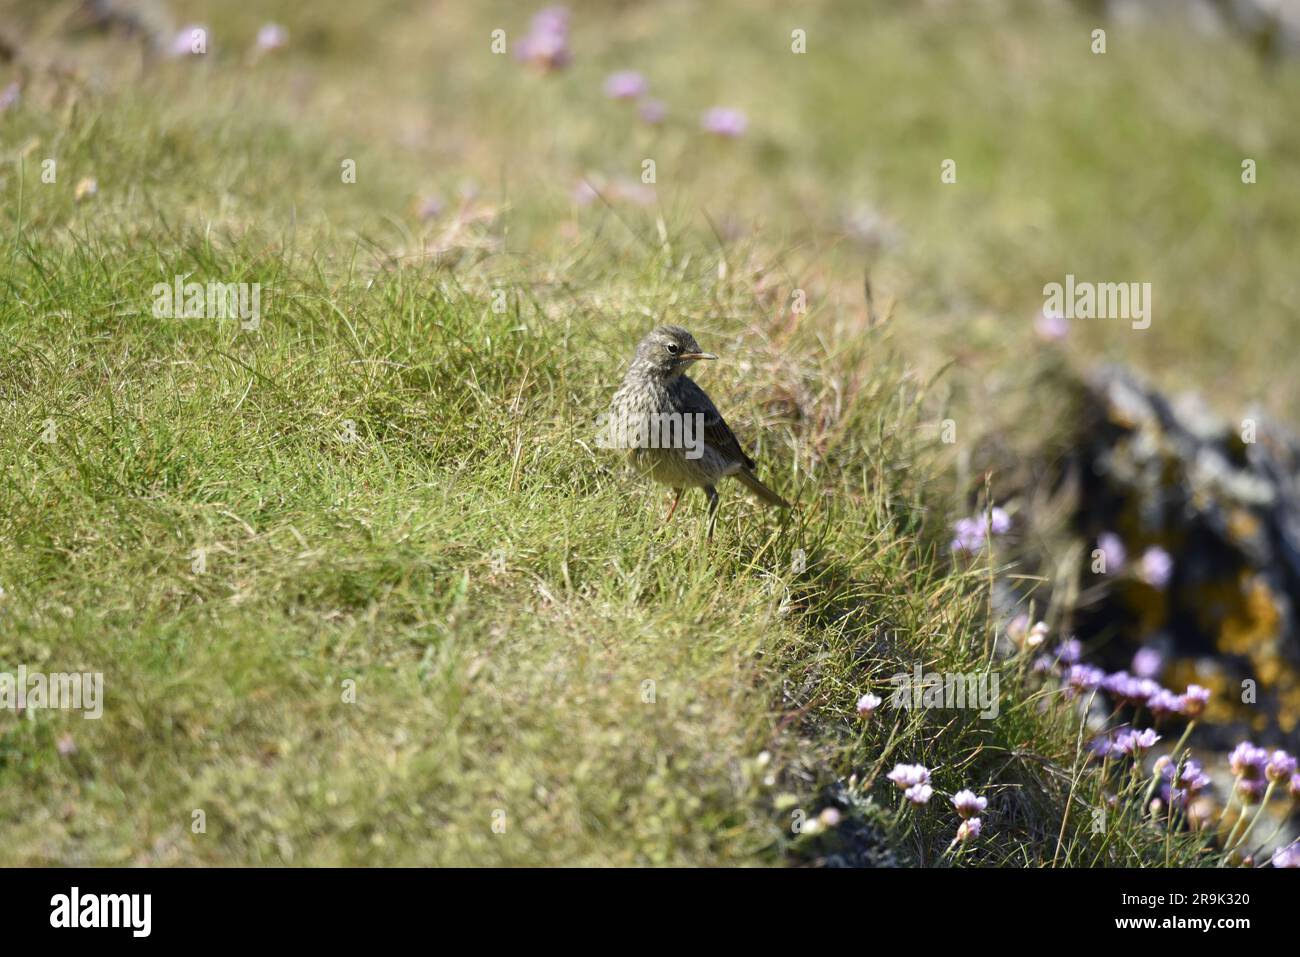 Eurasian Rock Pipit (Anthus petrosus) Standing on Grass and Thrift, Facing Camera with Head Turned to Right of Image, taken on the Isle of Man, UK Stock Photo